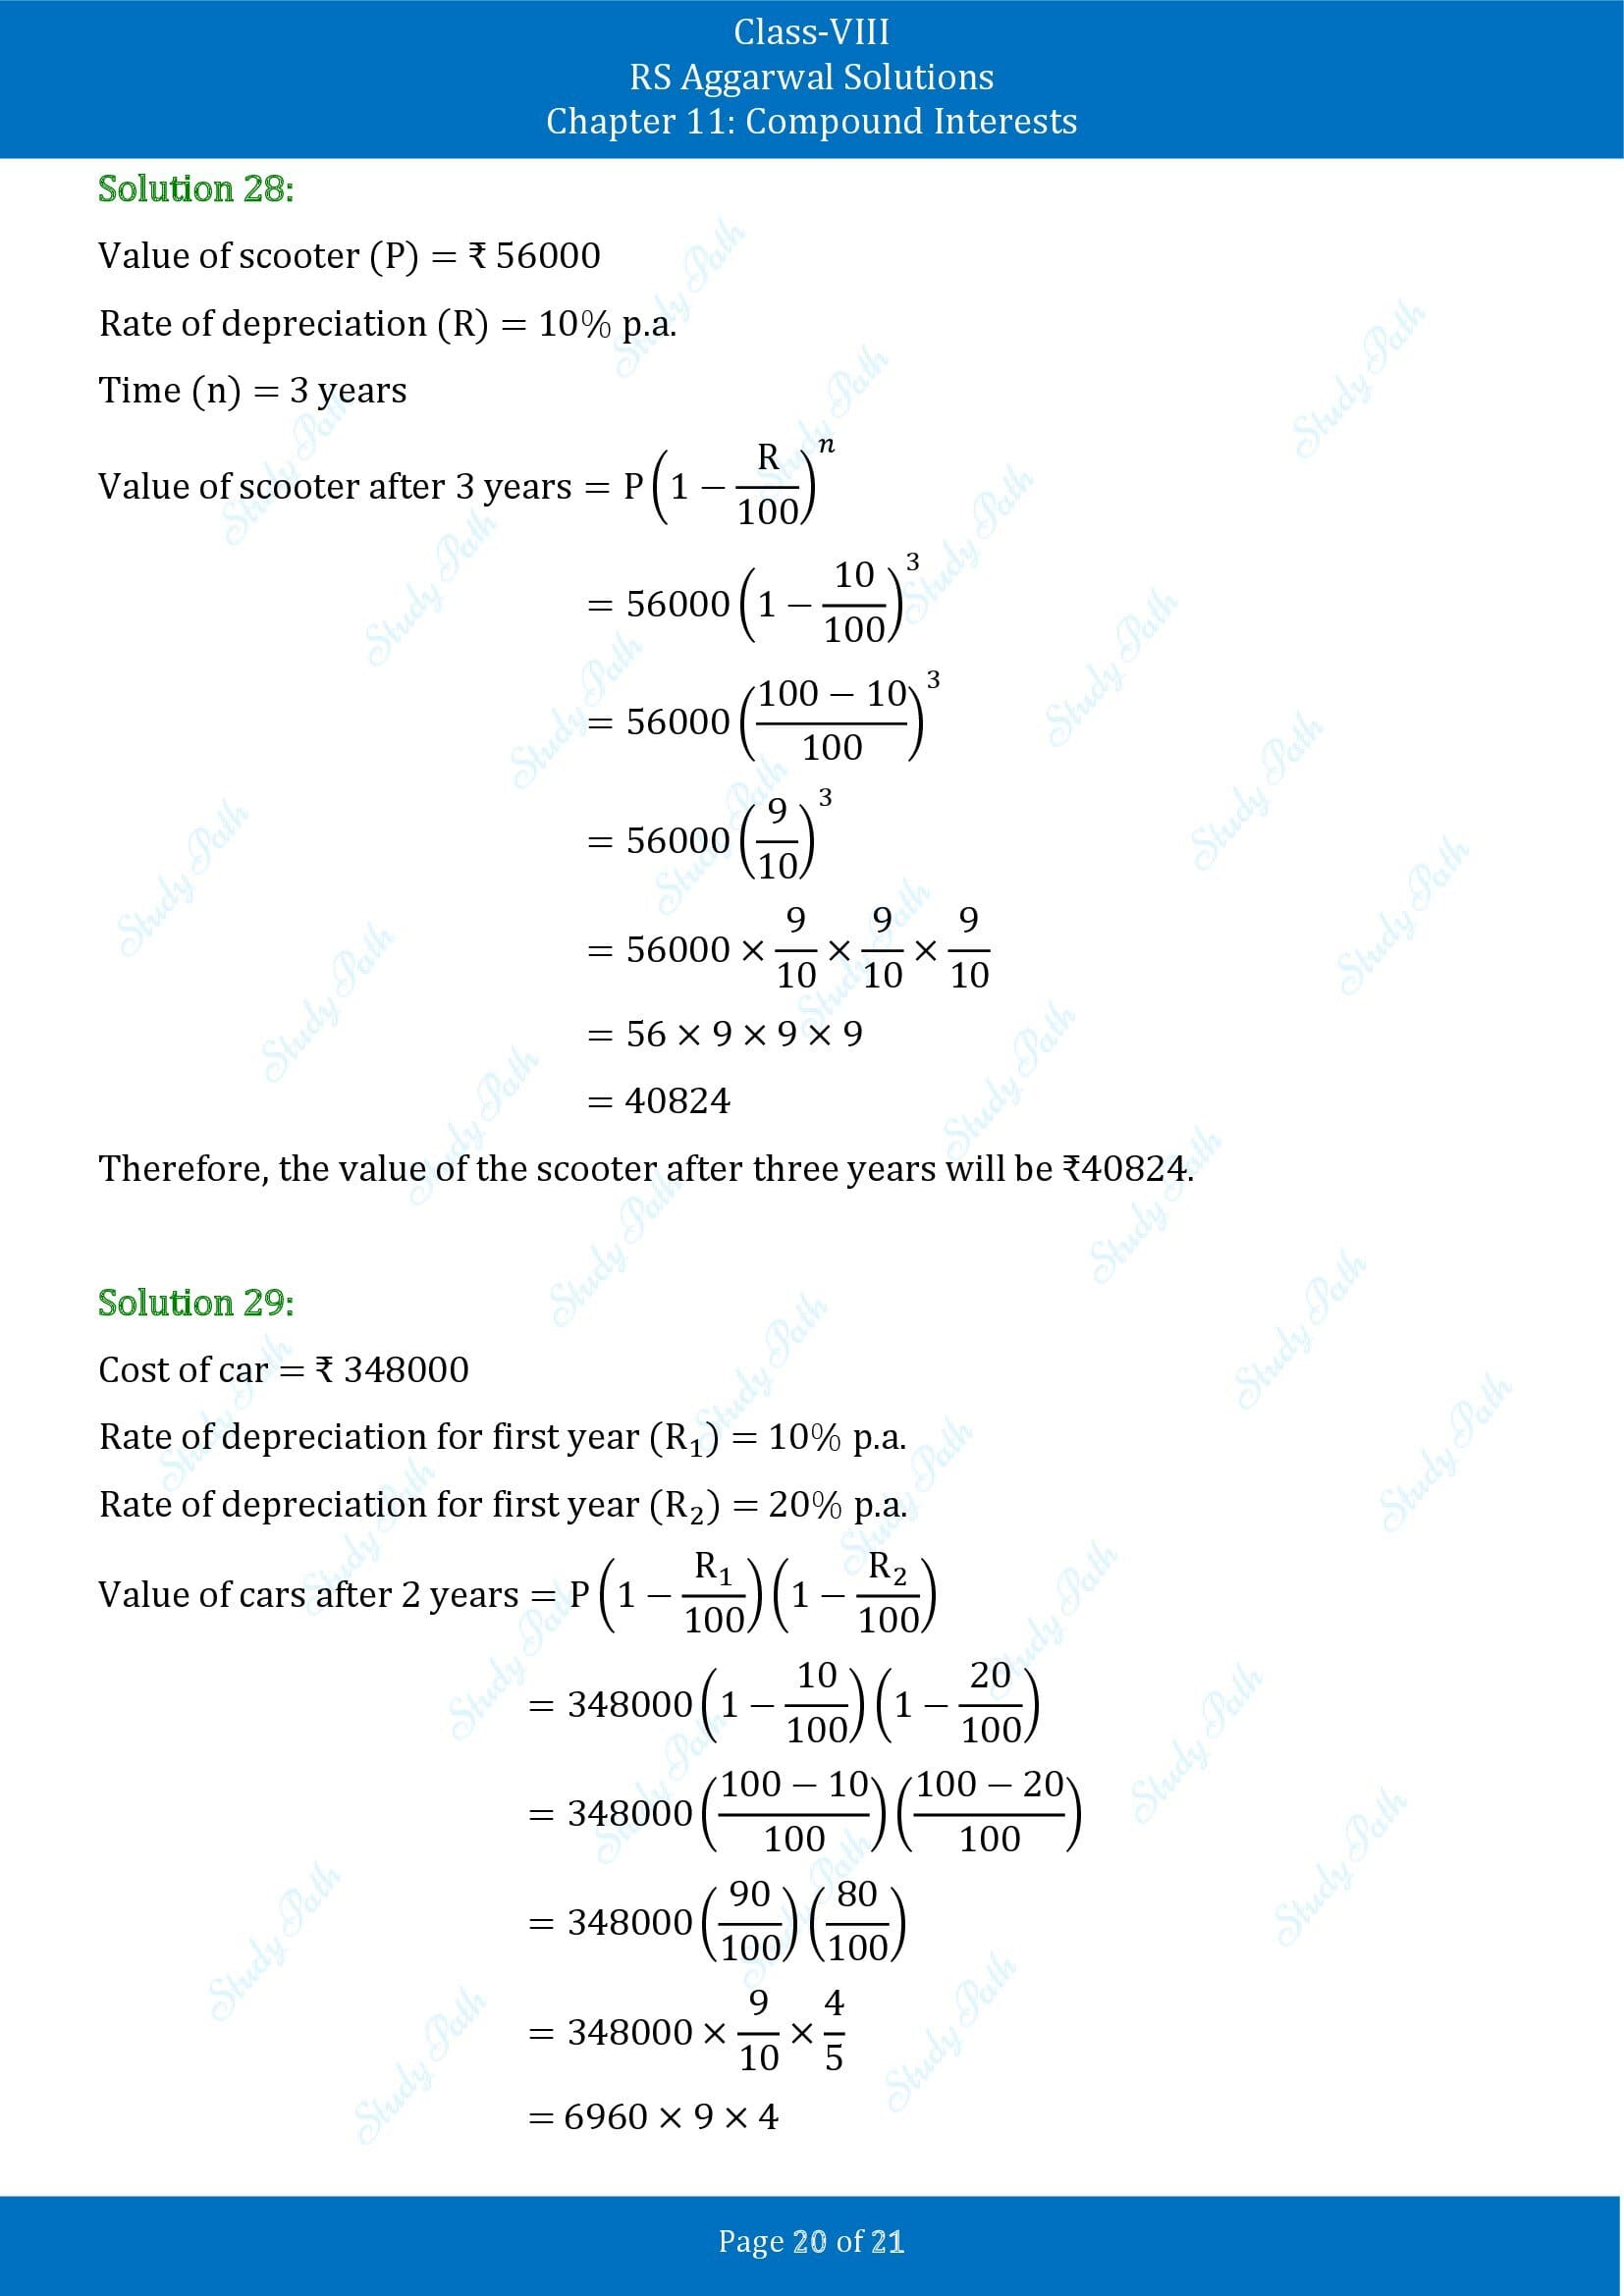 RS Aggarwal Solutions Class 8 Chapter 11 Compound Interests Exercise 11B 00020